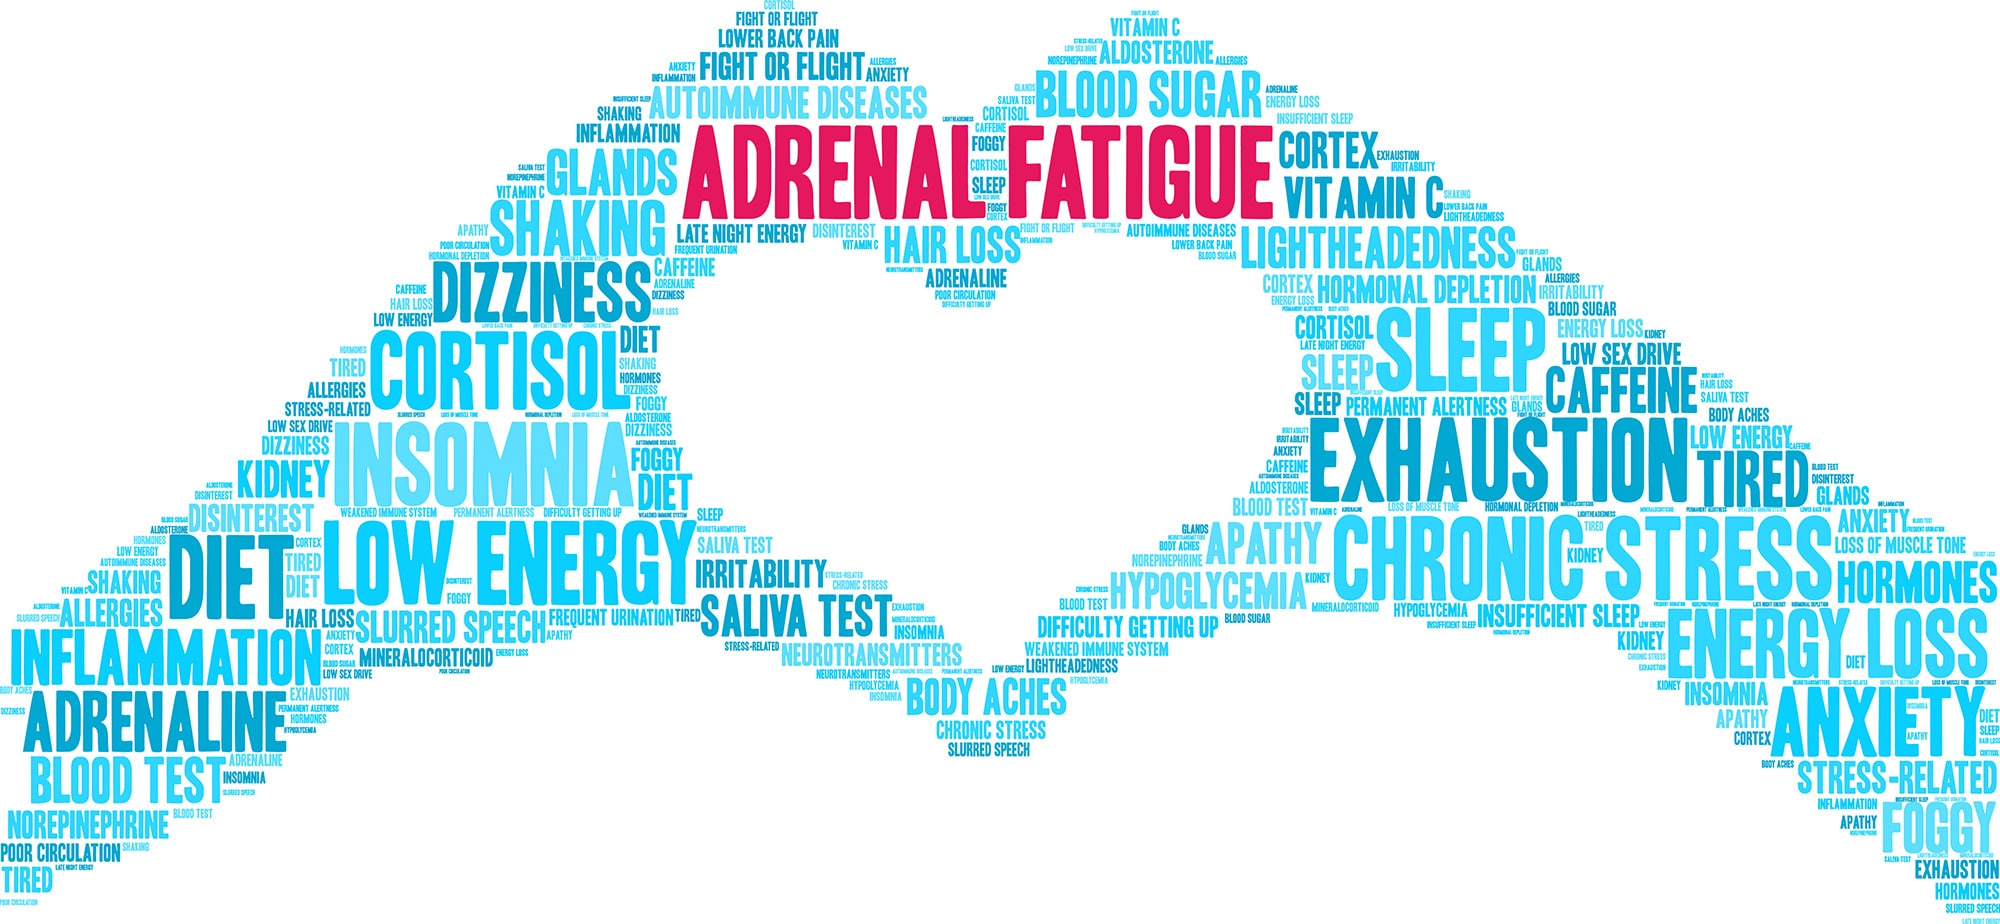 Image of joined hands forming a love heart. The hands are made up of words showcasing adrenal fatigue symptoms.